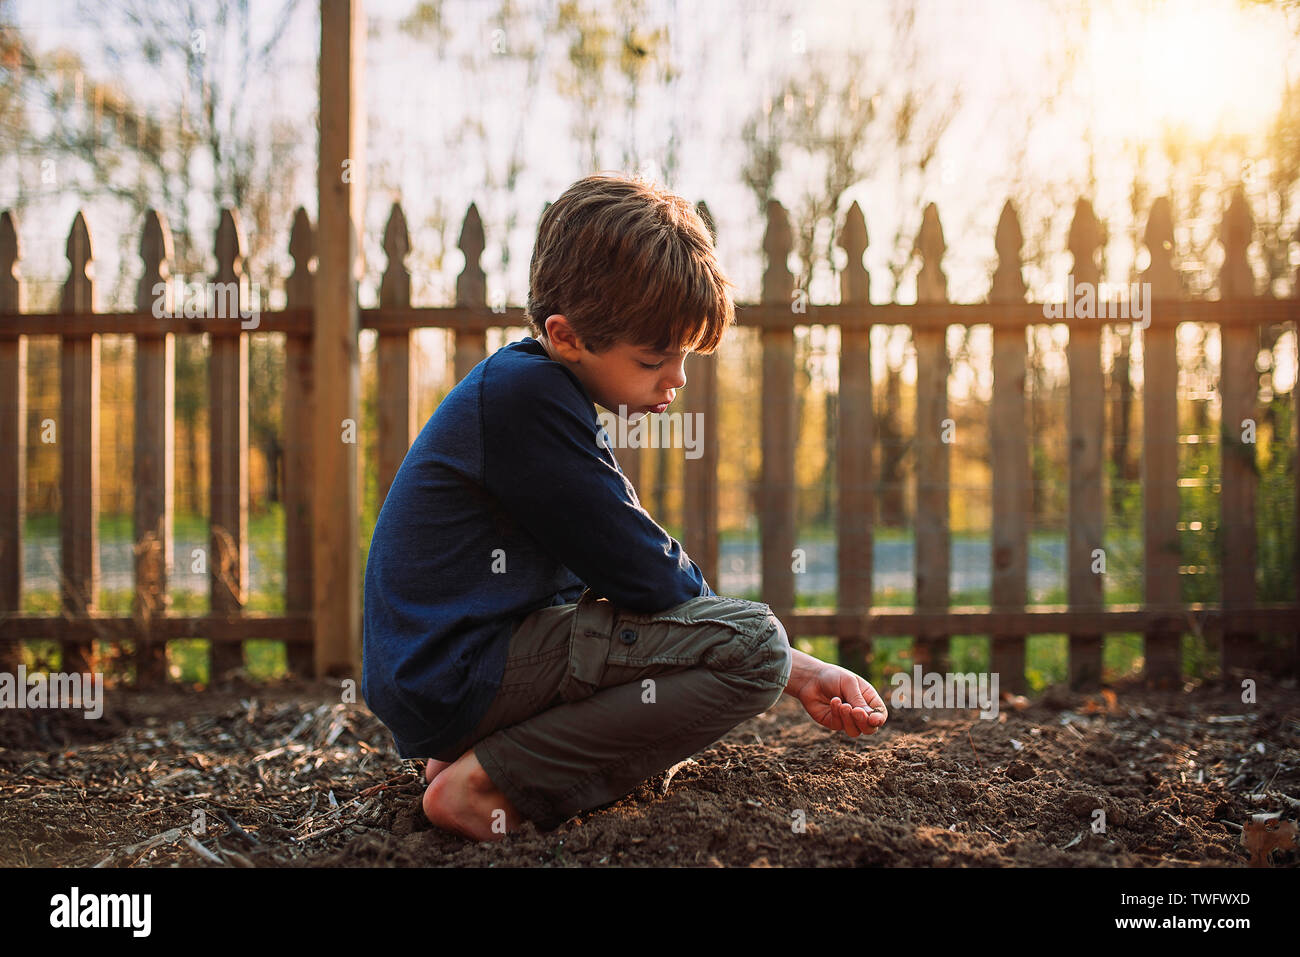 Boy planting seeds in a garden, United States Stock Photo